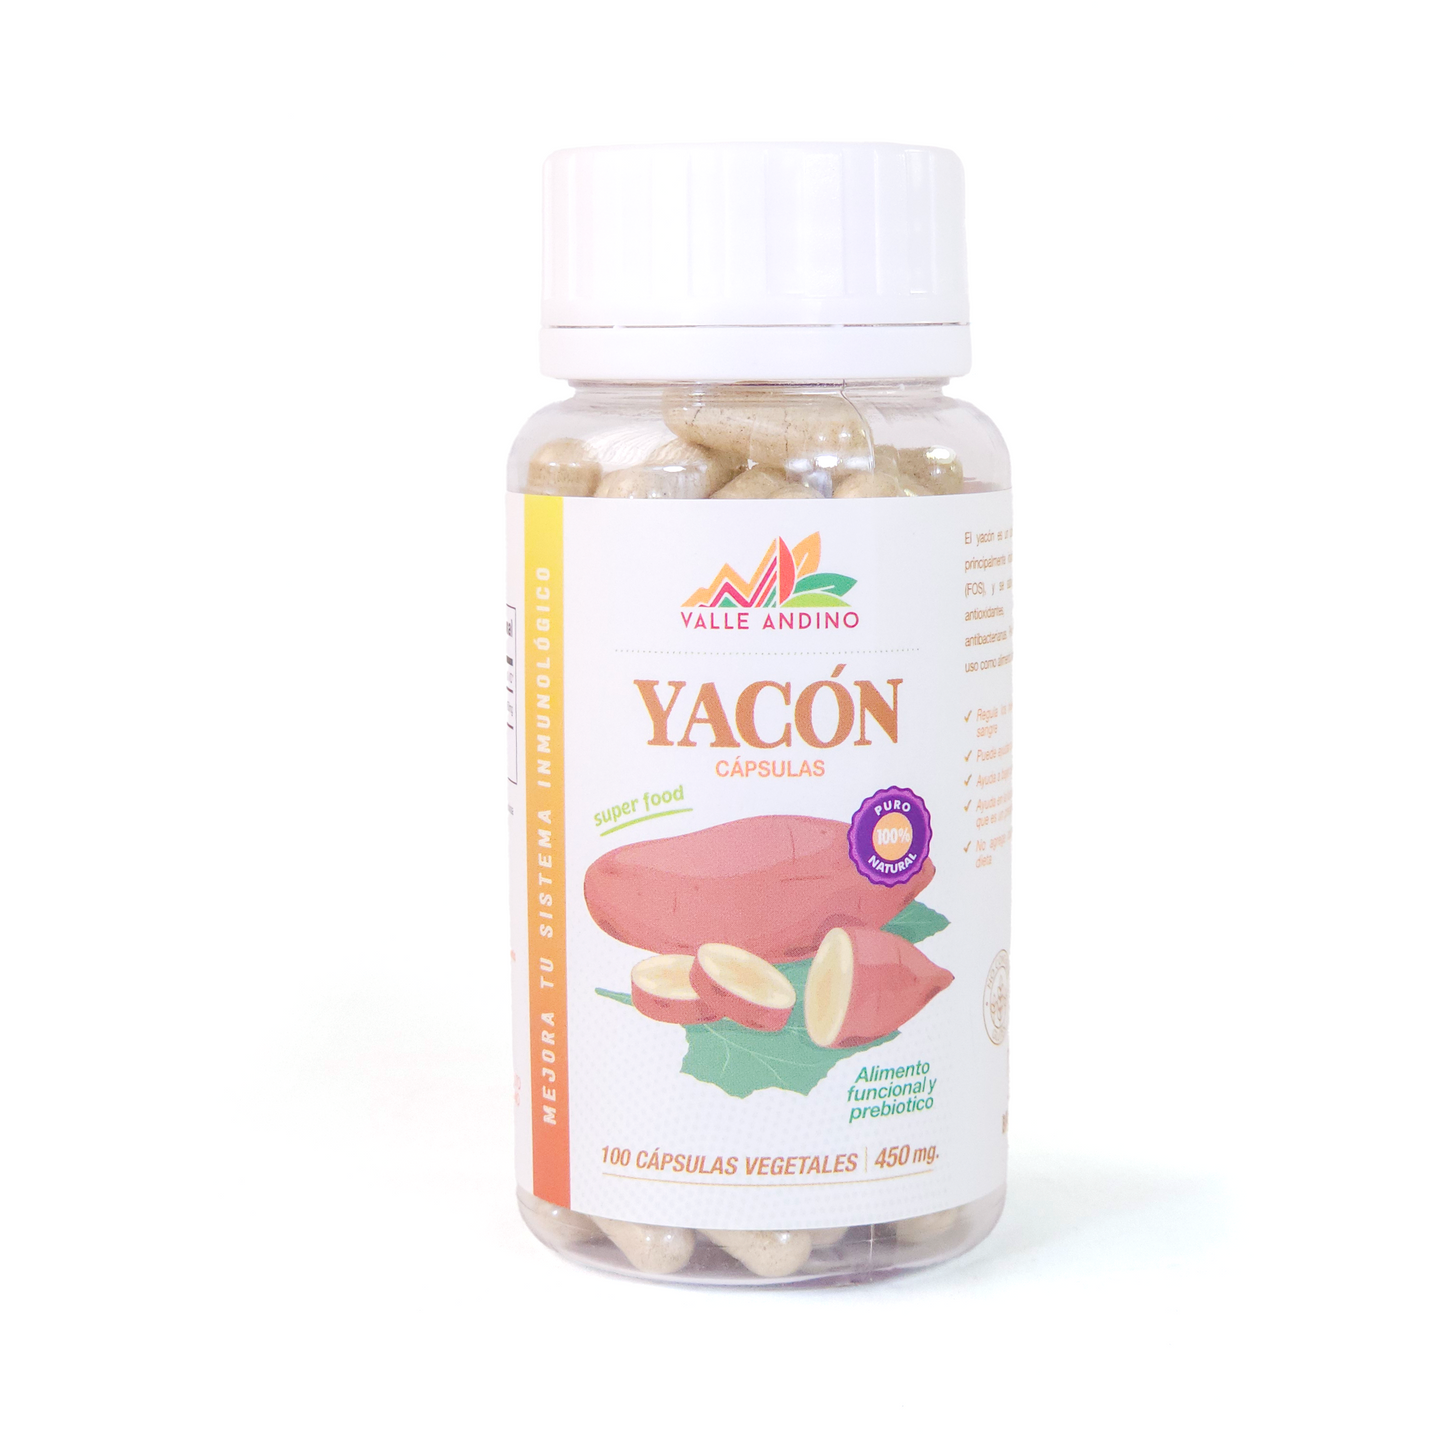 Yacon in vegetable capsules x 100 units